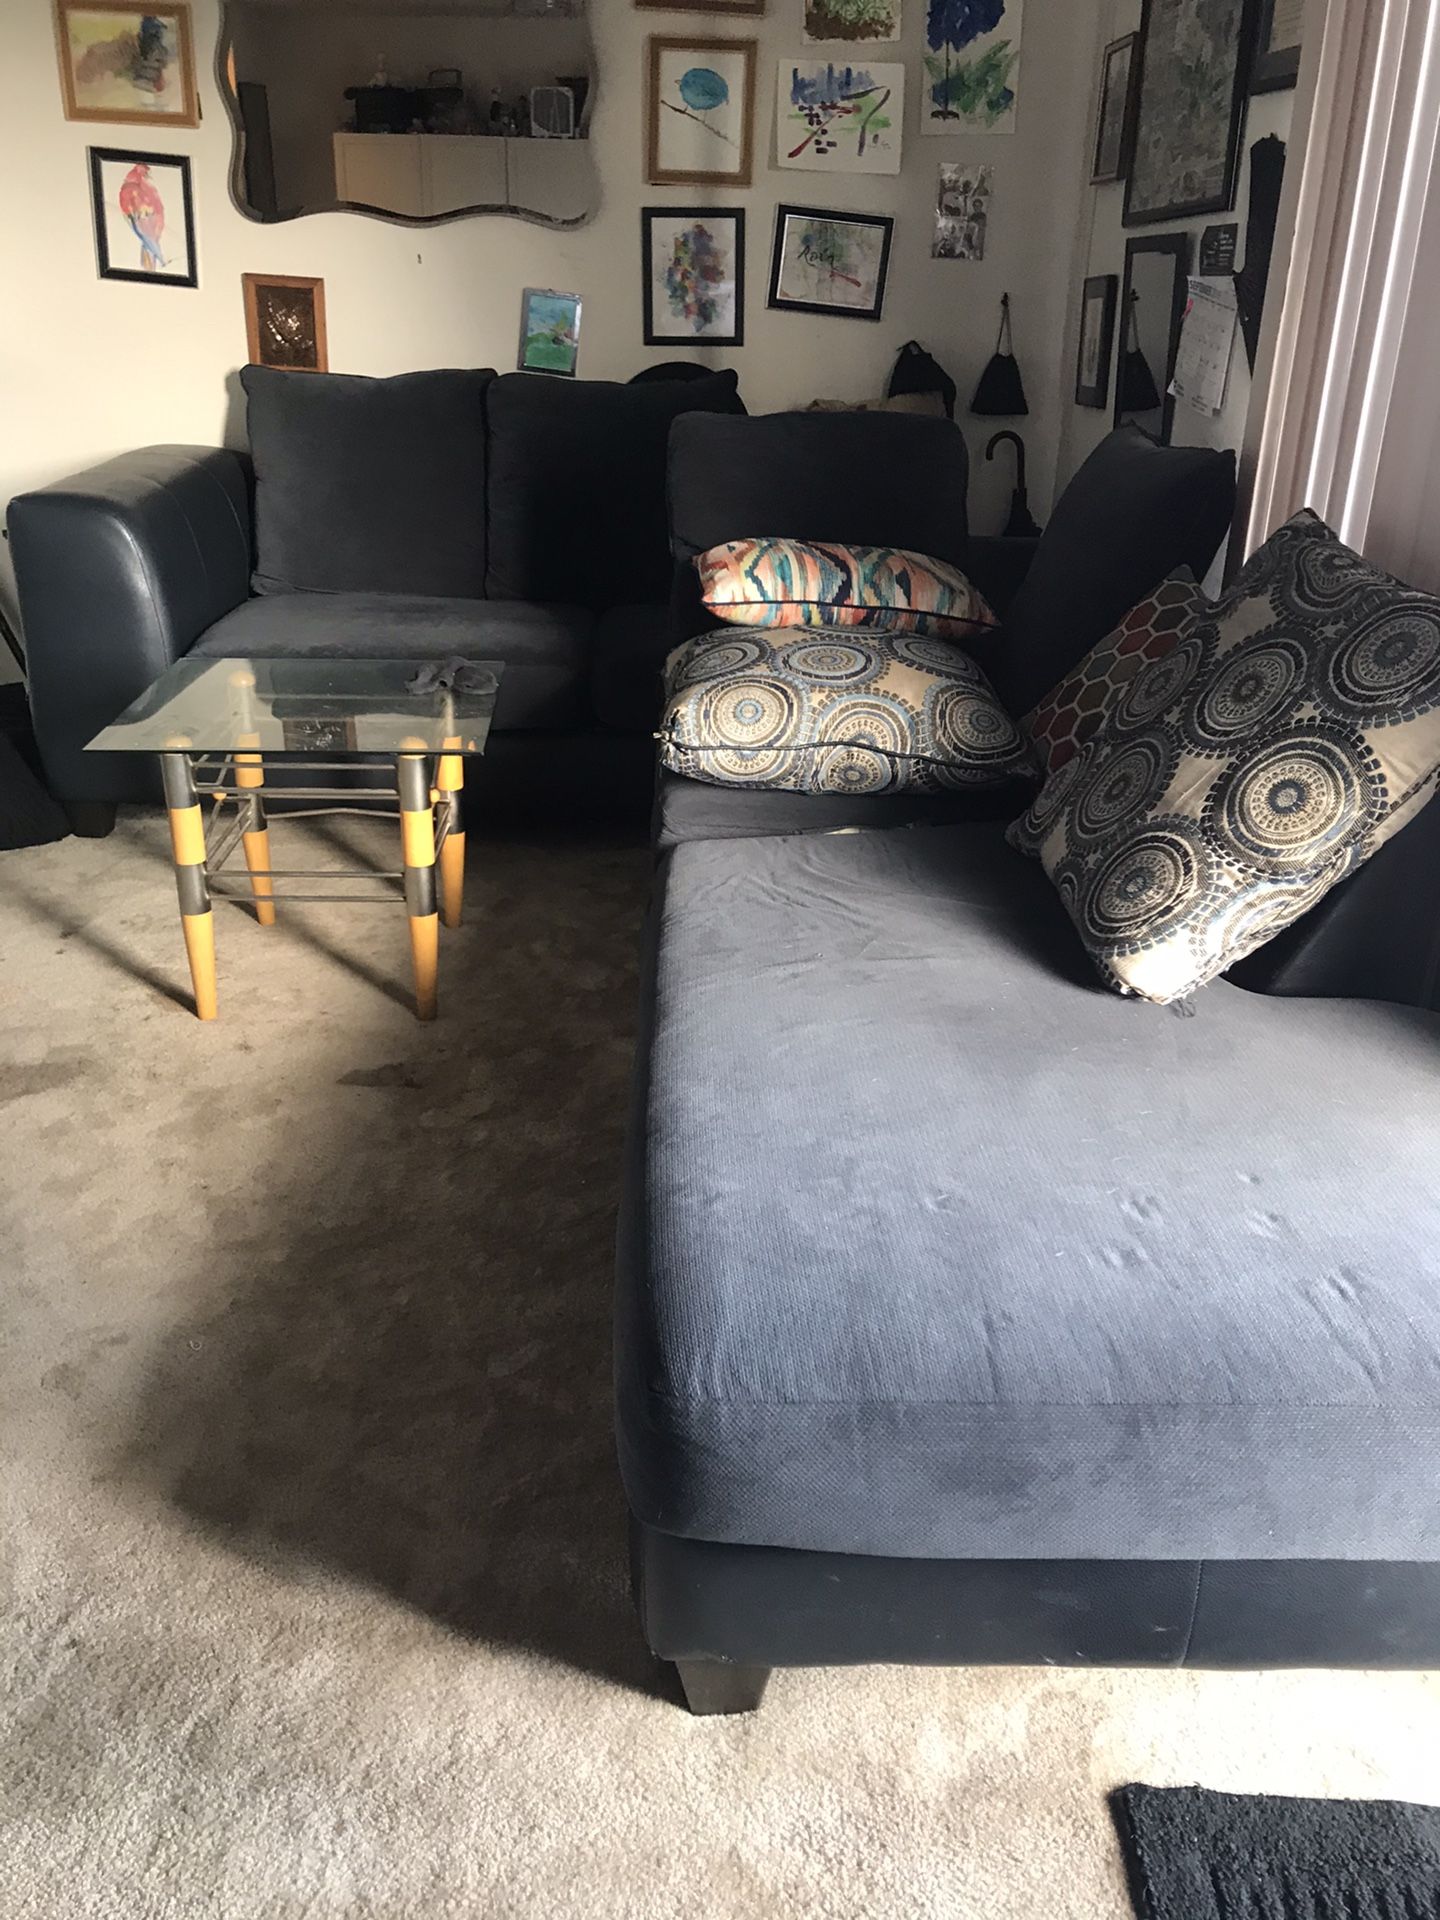 Sectional couch set